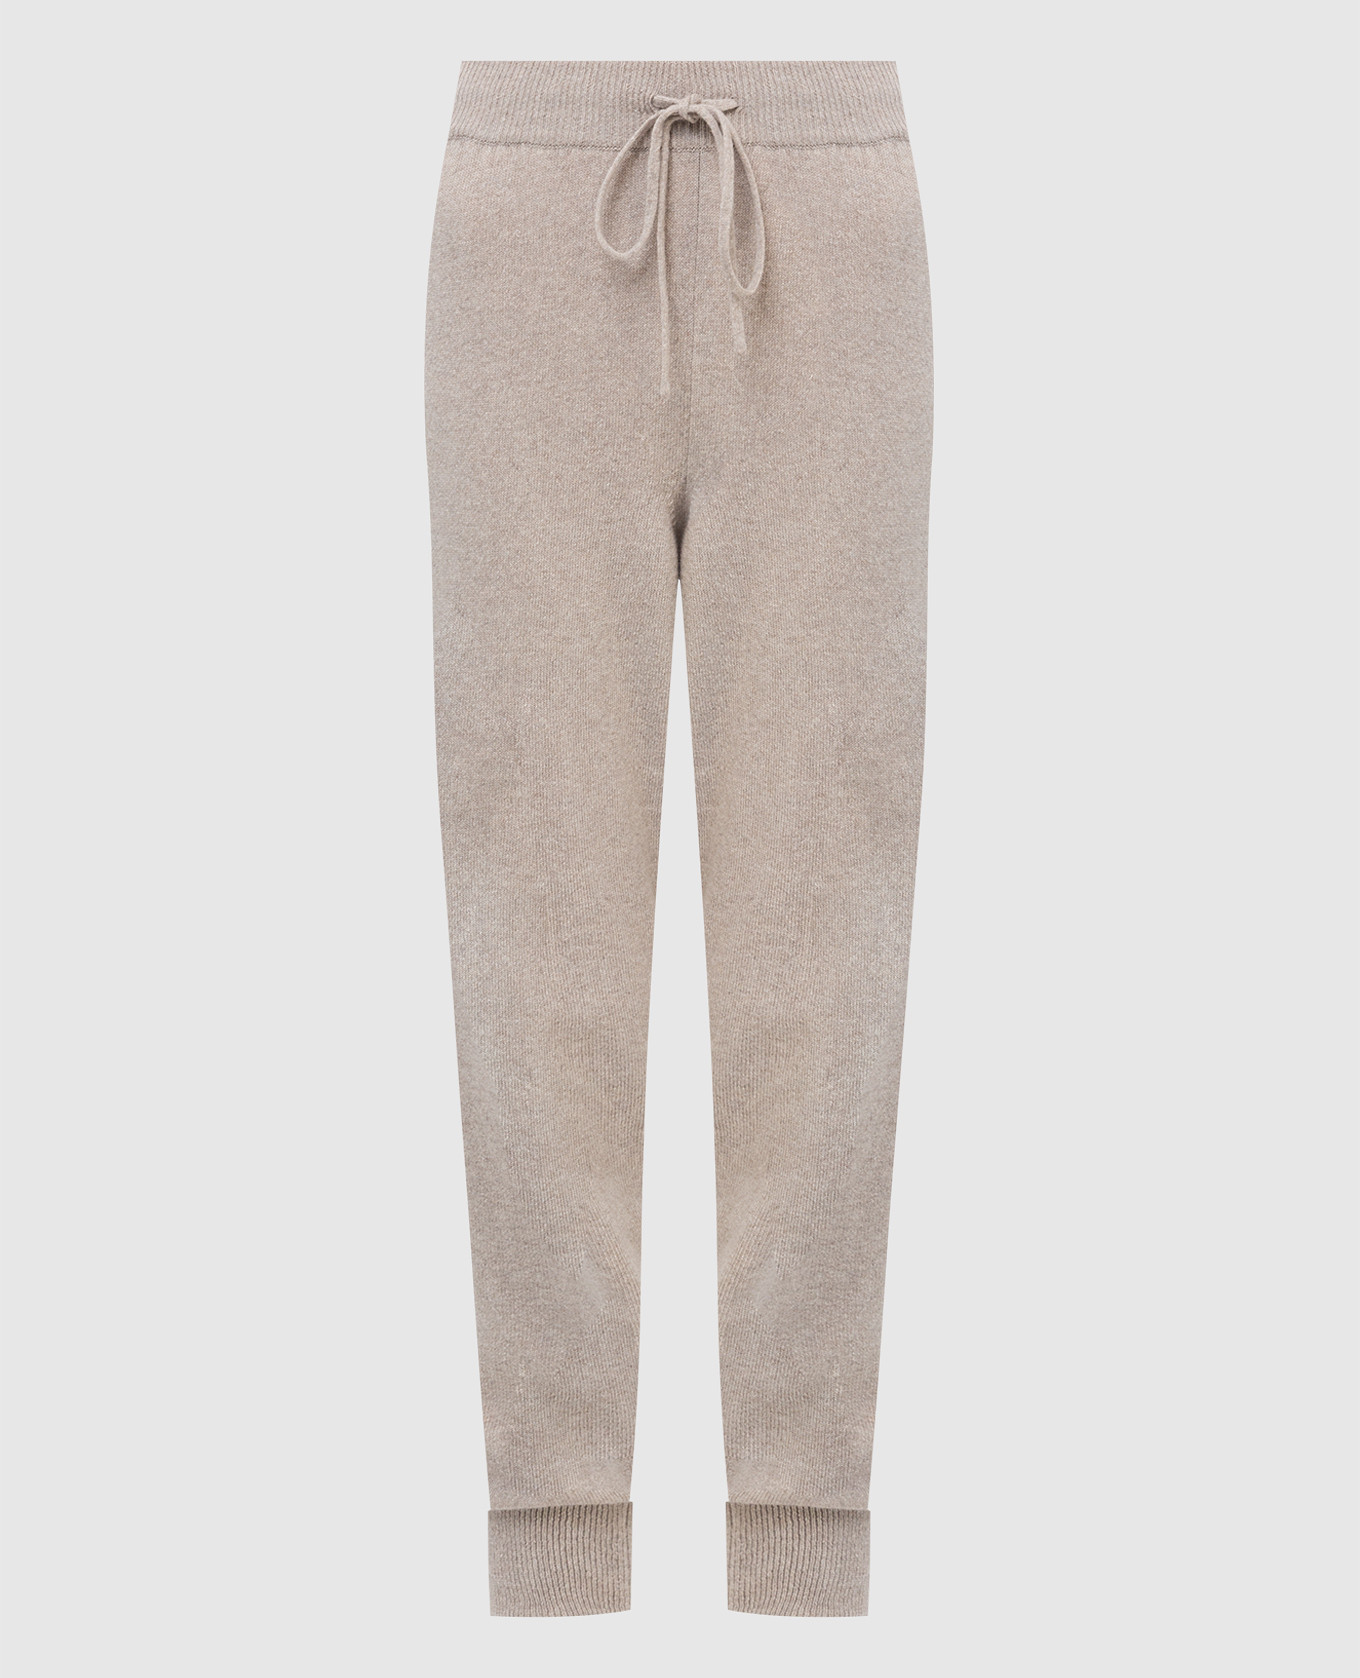 Light beige wool and cashmere joggers